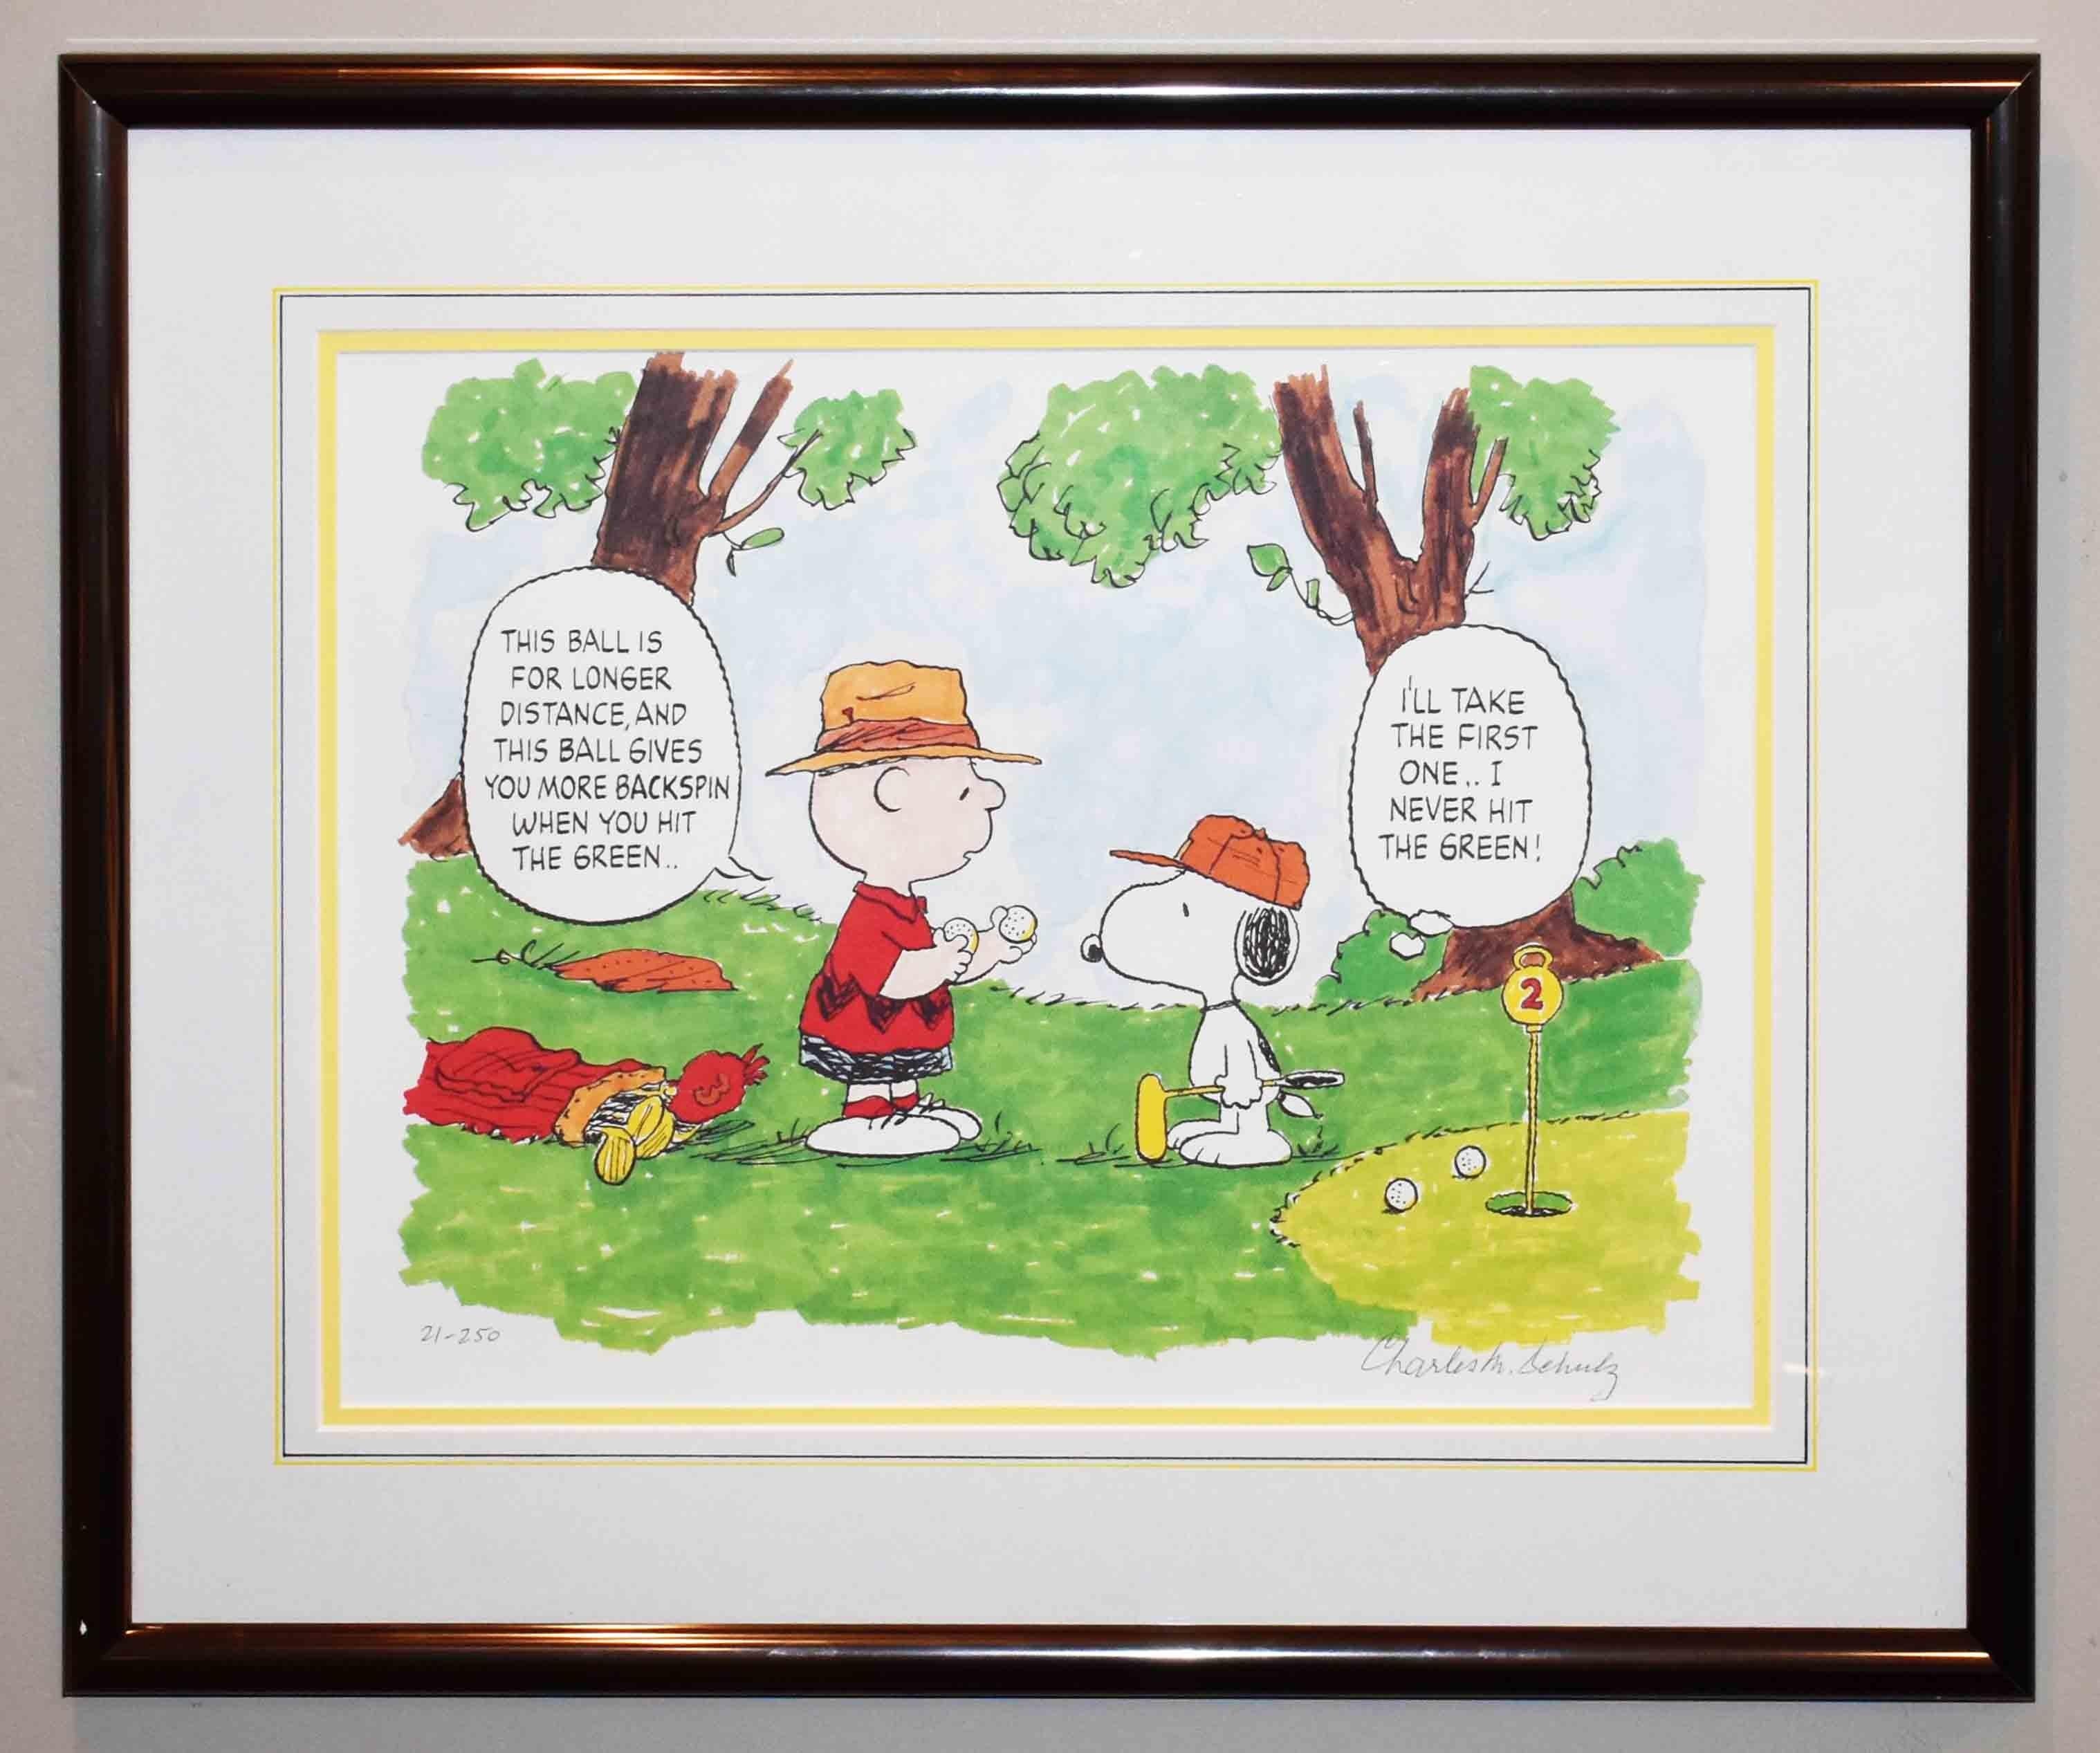 Hitting the Green - Print by Charles M. Schulz